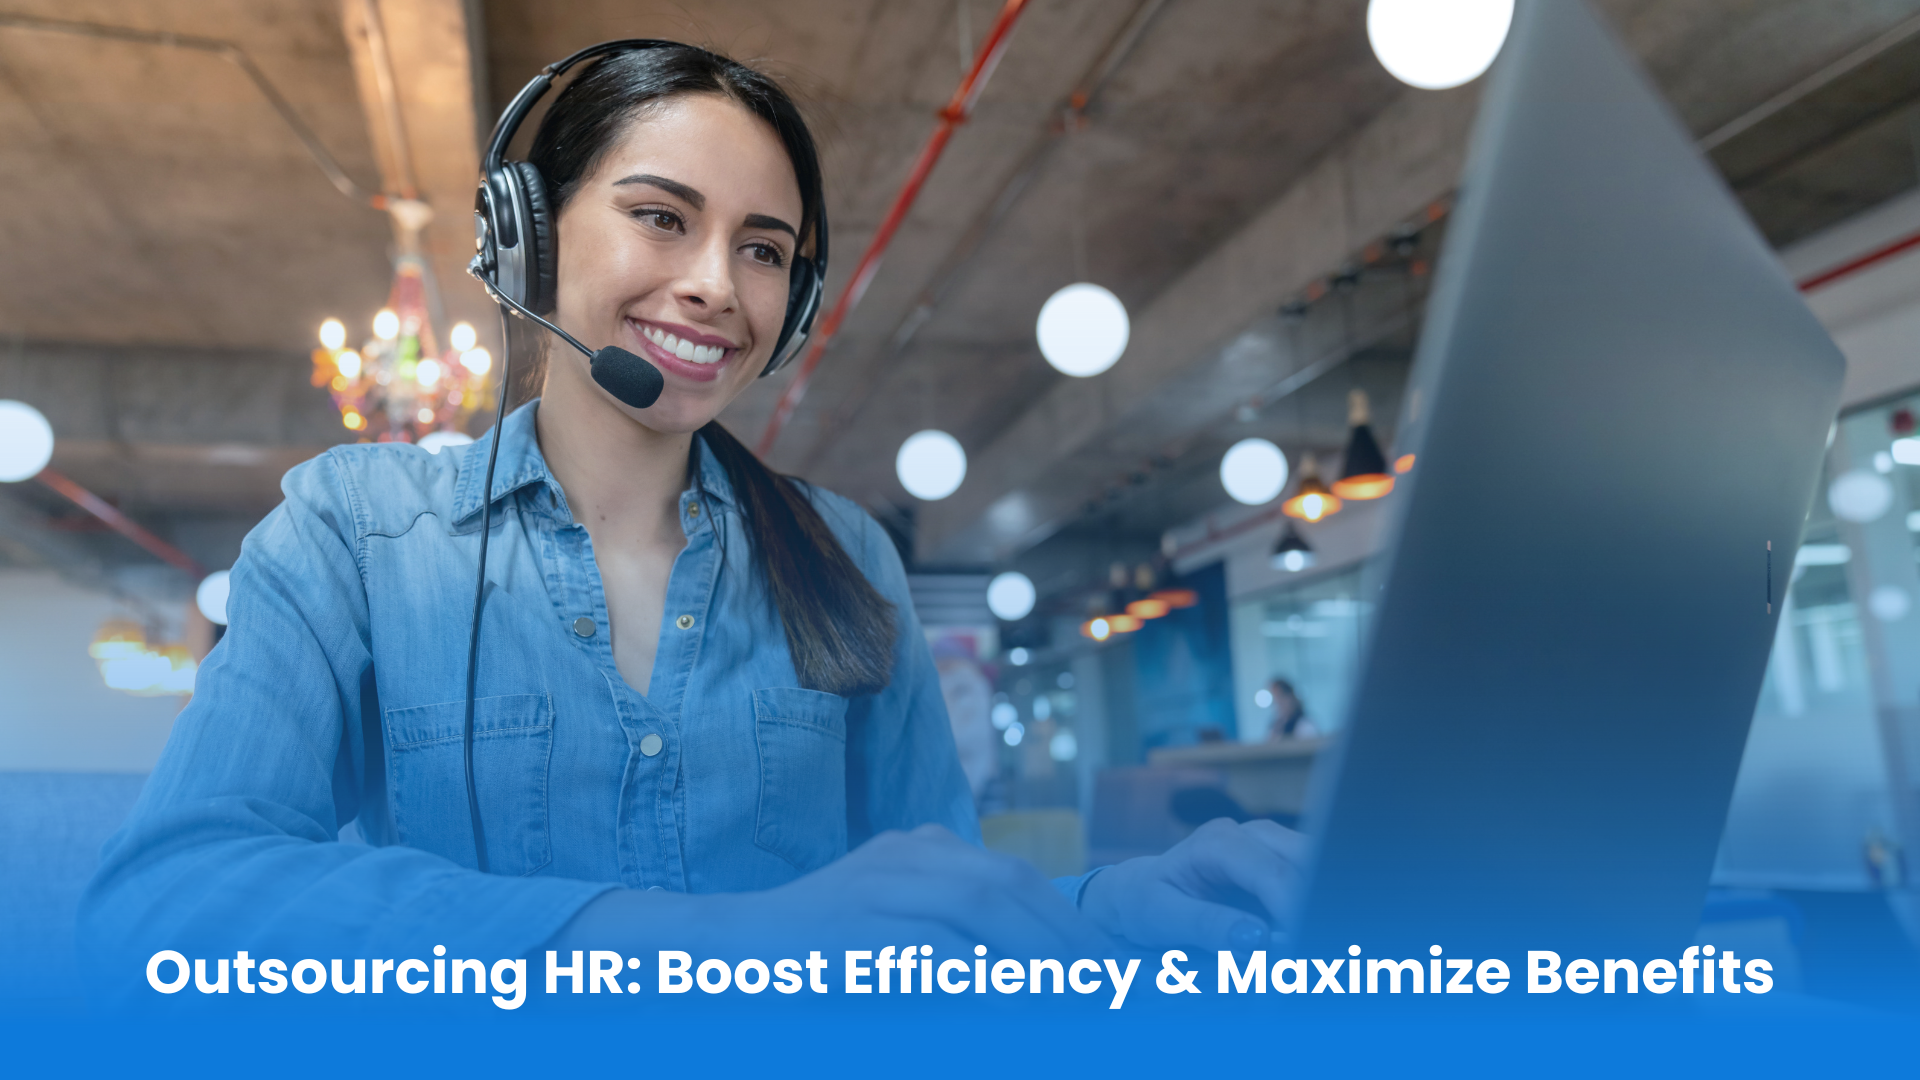 Outsourcing HR services can boost efficiency and maximize benefits for your business.